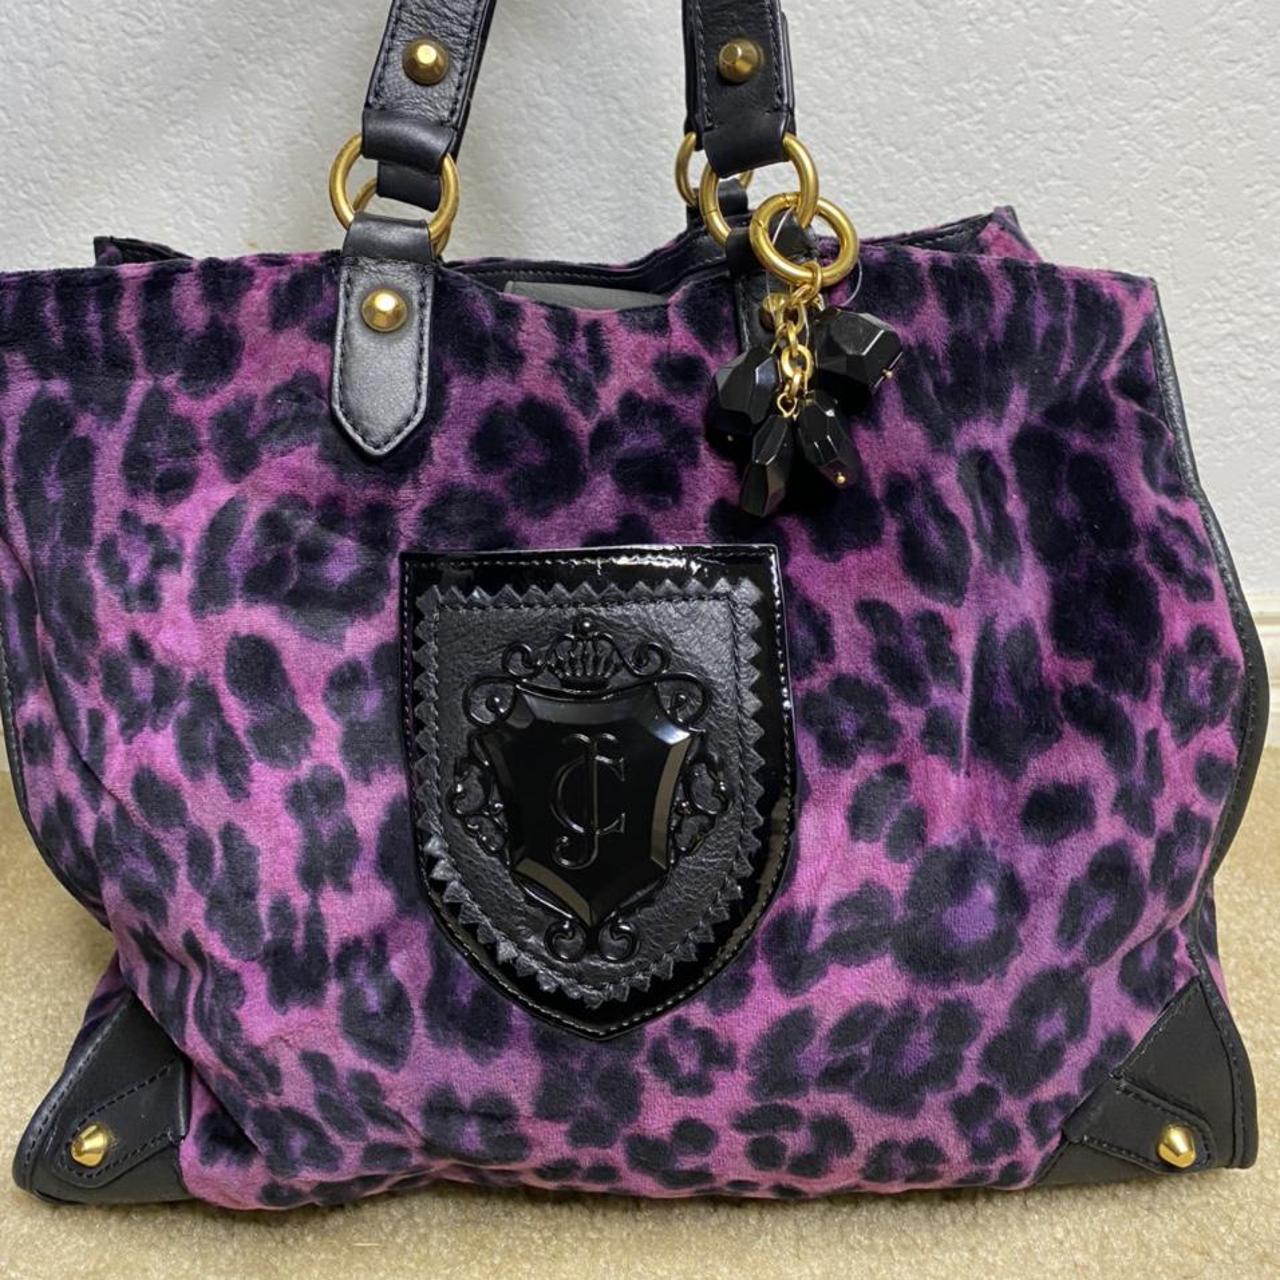 Rare Juicy Couture Purse | Juicy couture handbags, Juicy couture purse, Juicy  couture bags